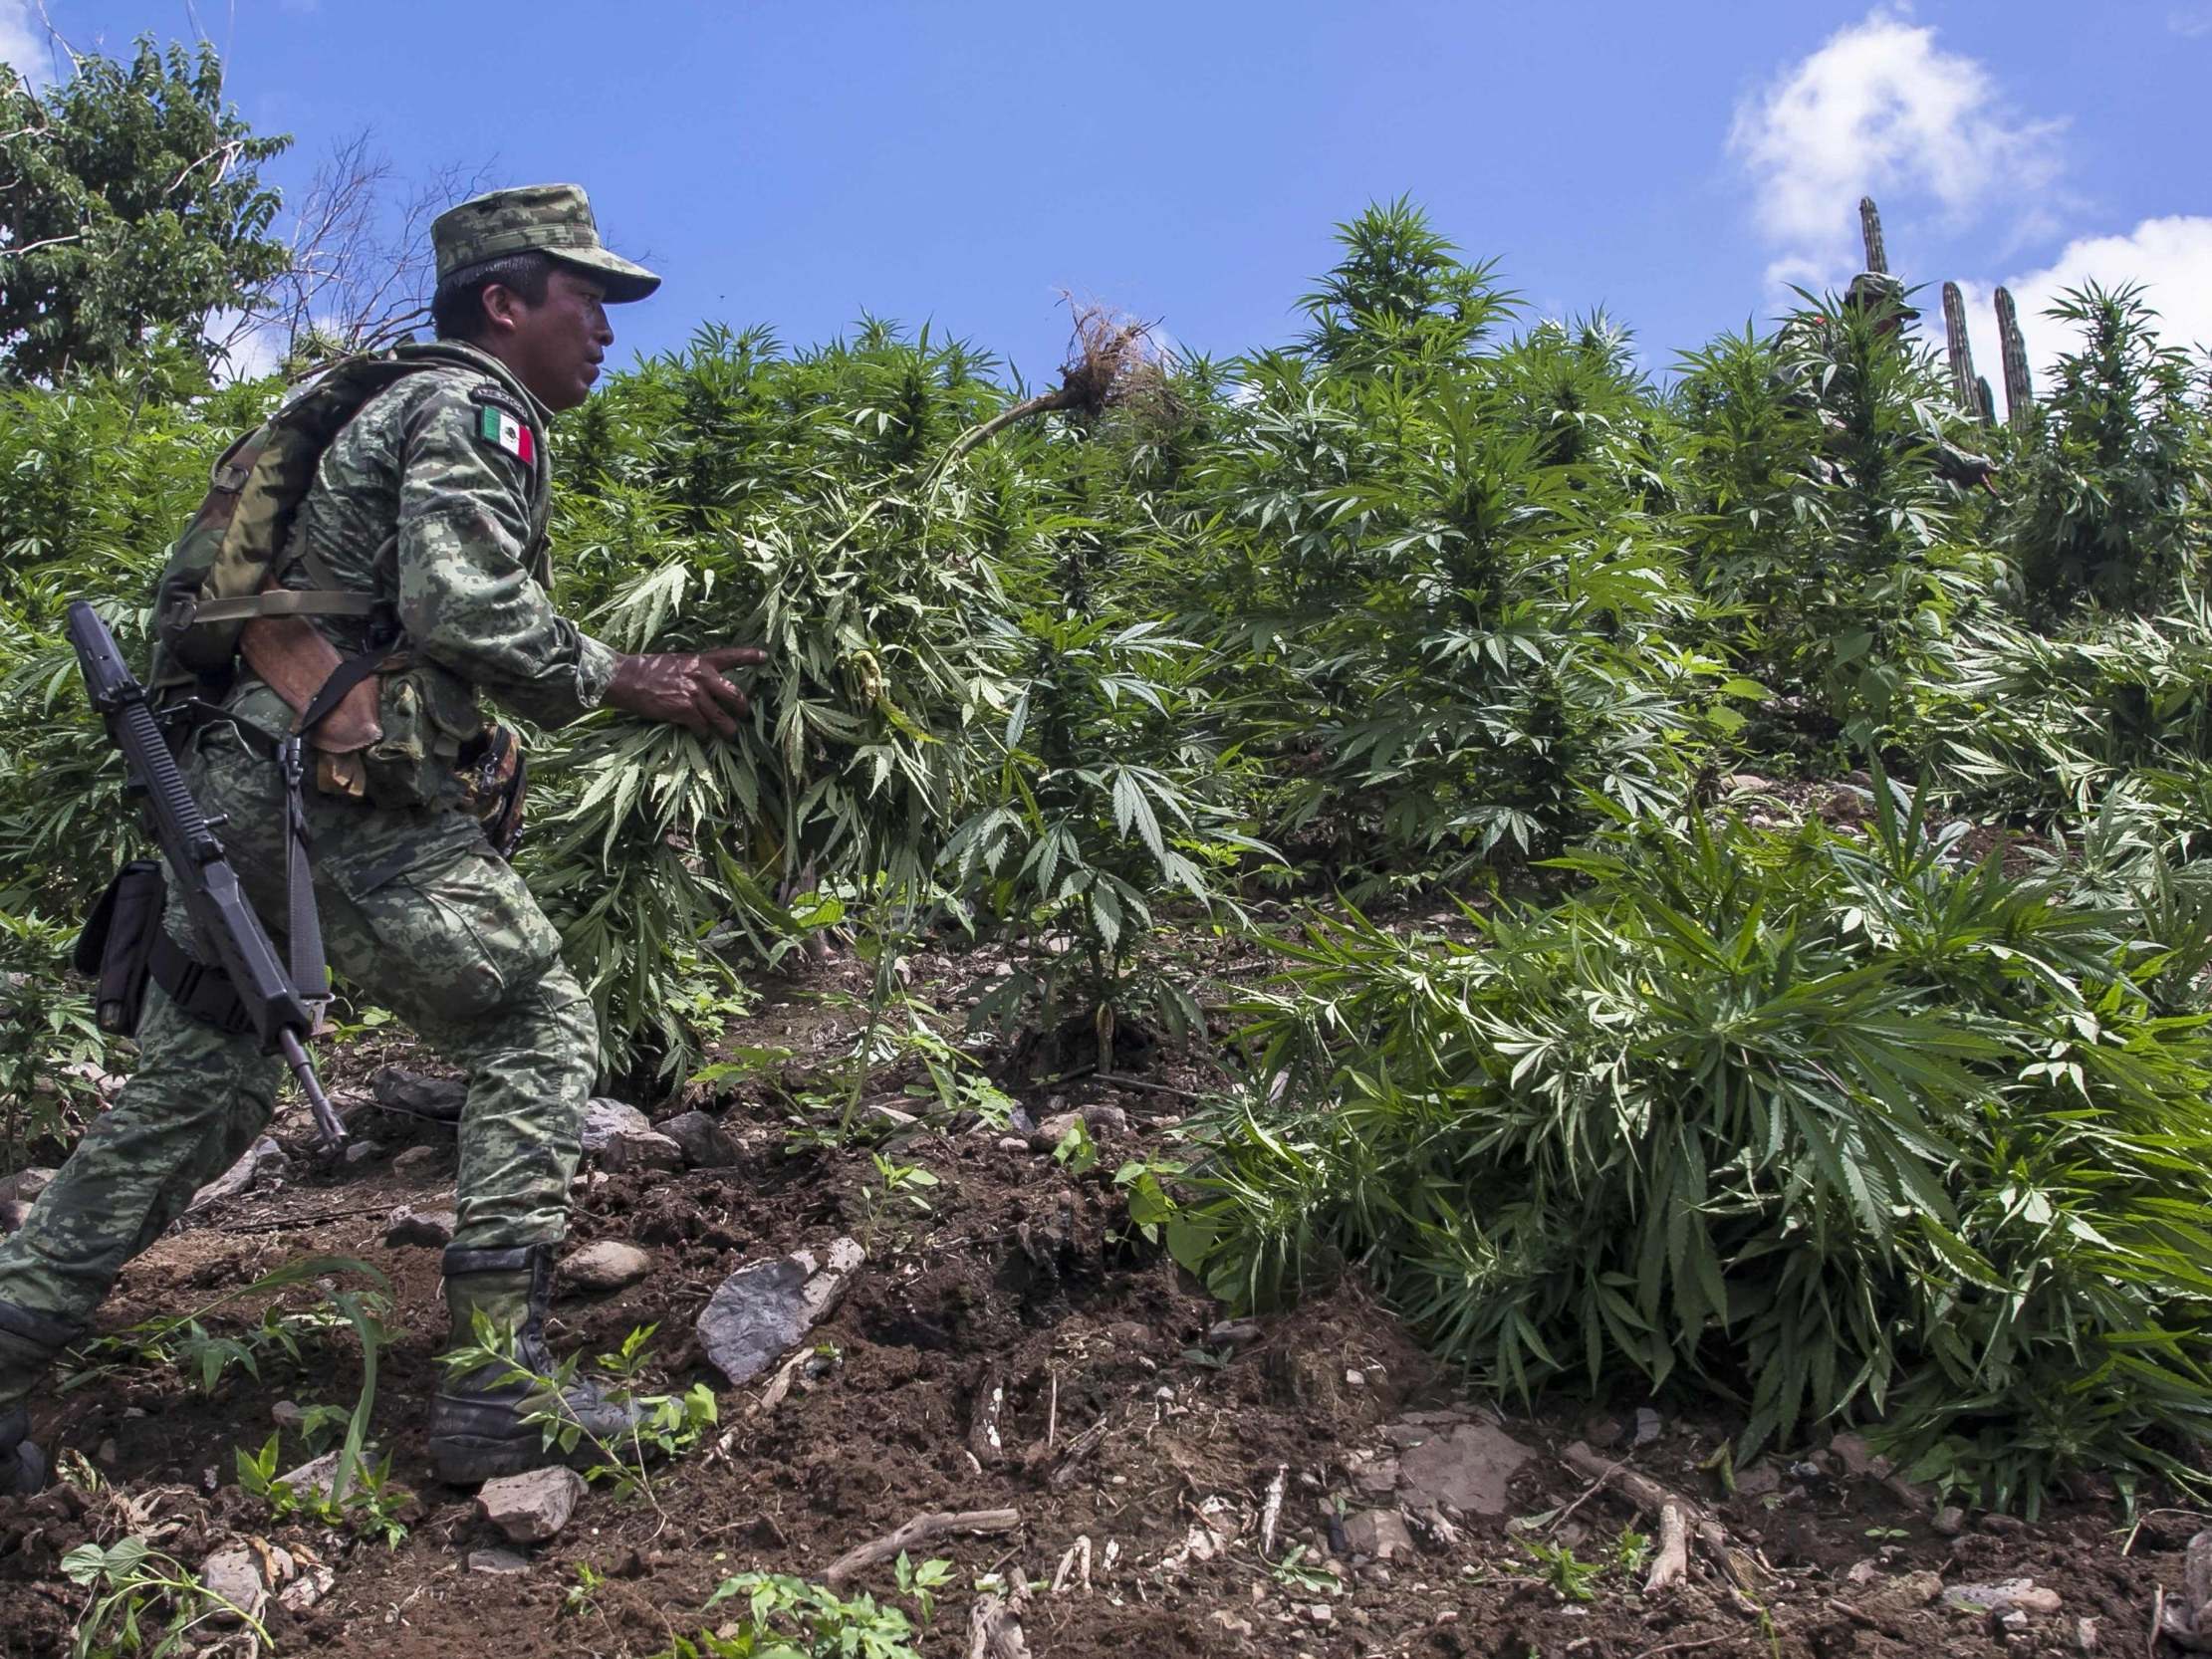 A Mexican soldier takes part in the destruction of an illegal marijuana plantation in Sinaloa, Mexico, on on 2 October 2019